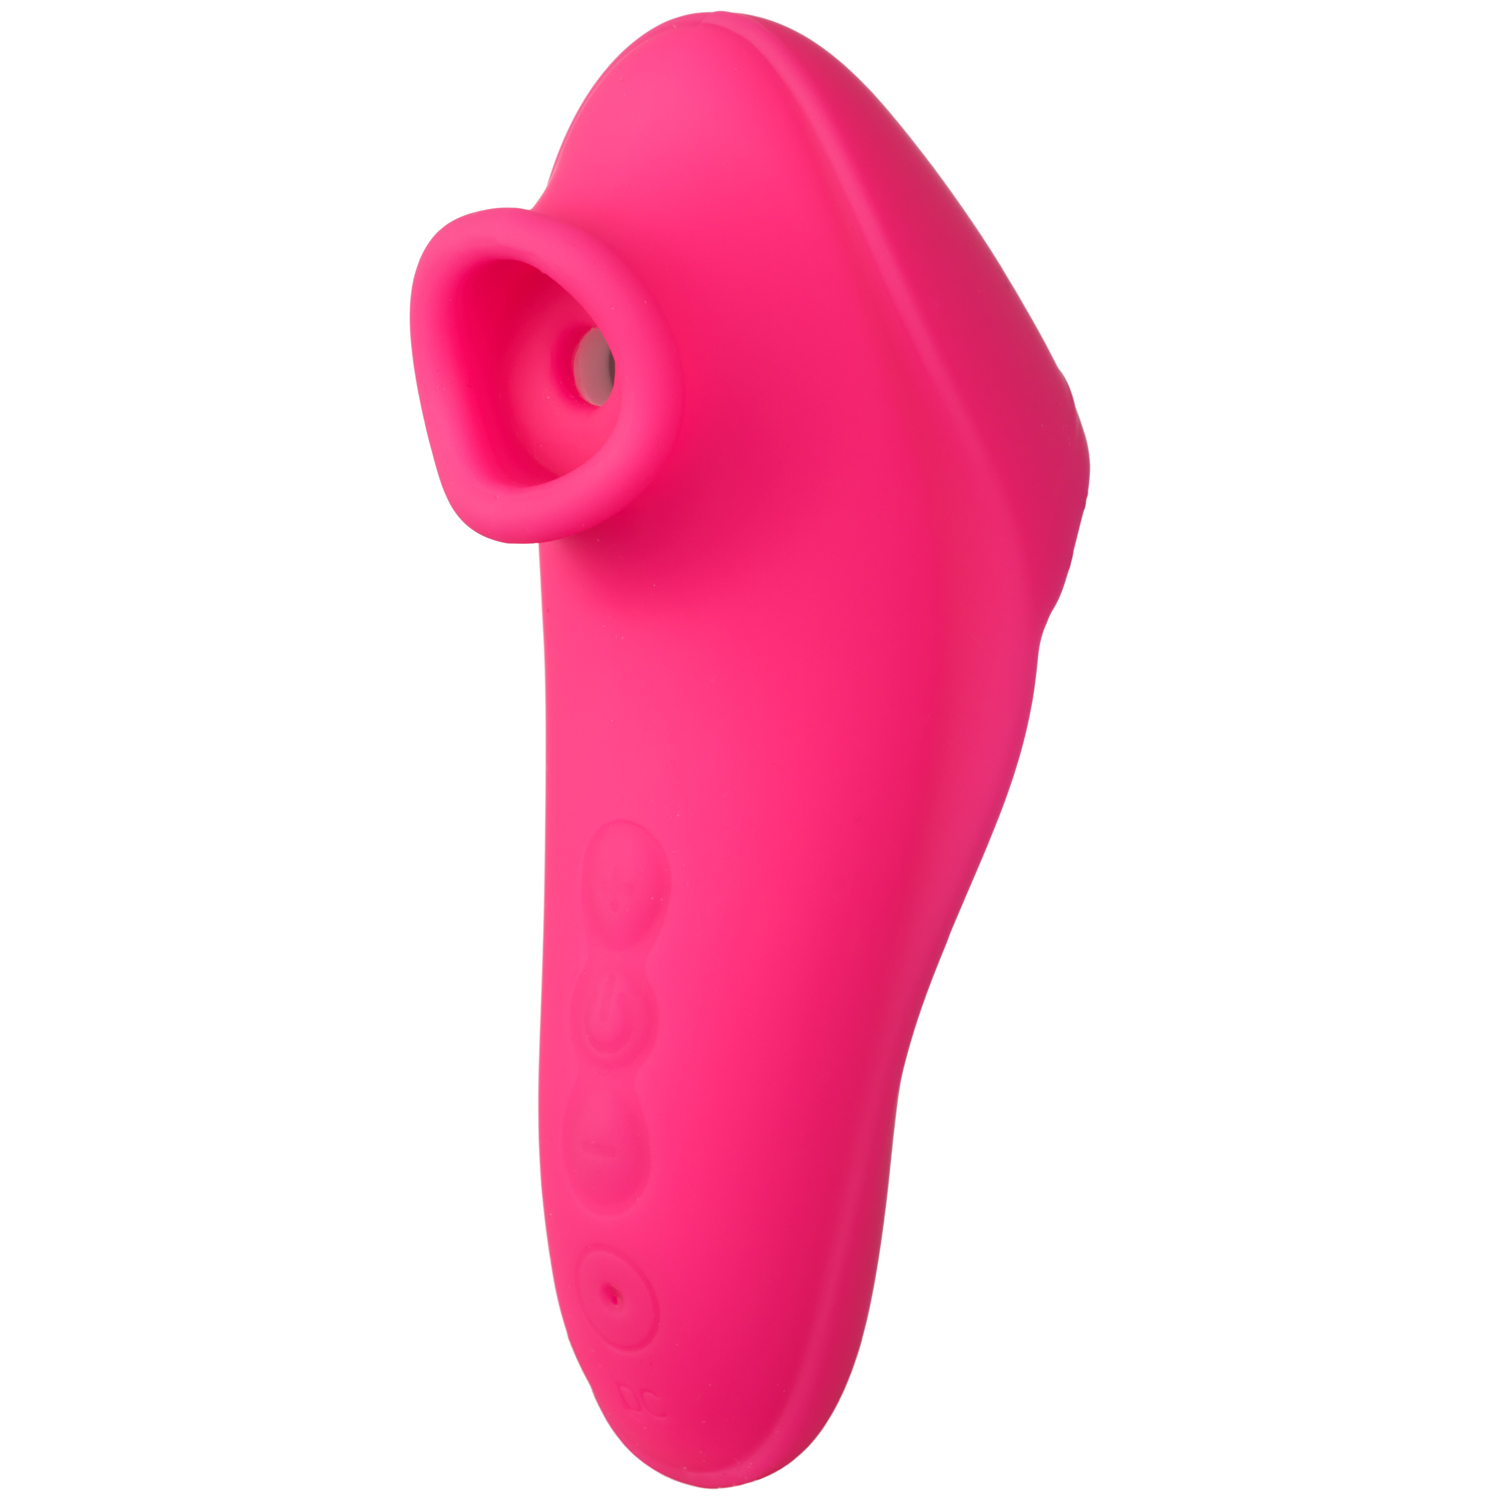 Tracy's Dog Mage Suction Finger Vibrator      - Pink